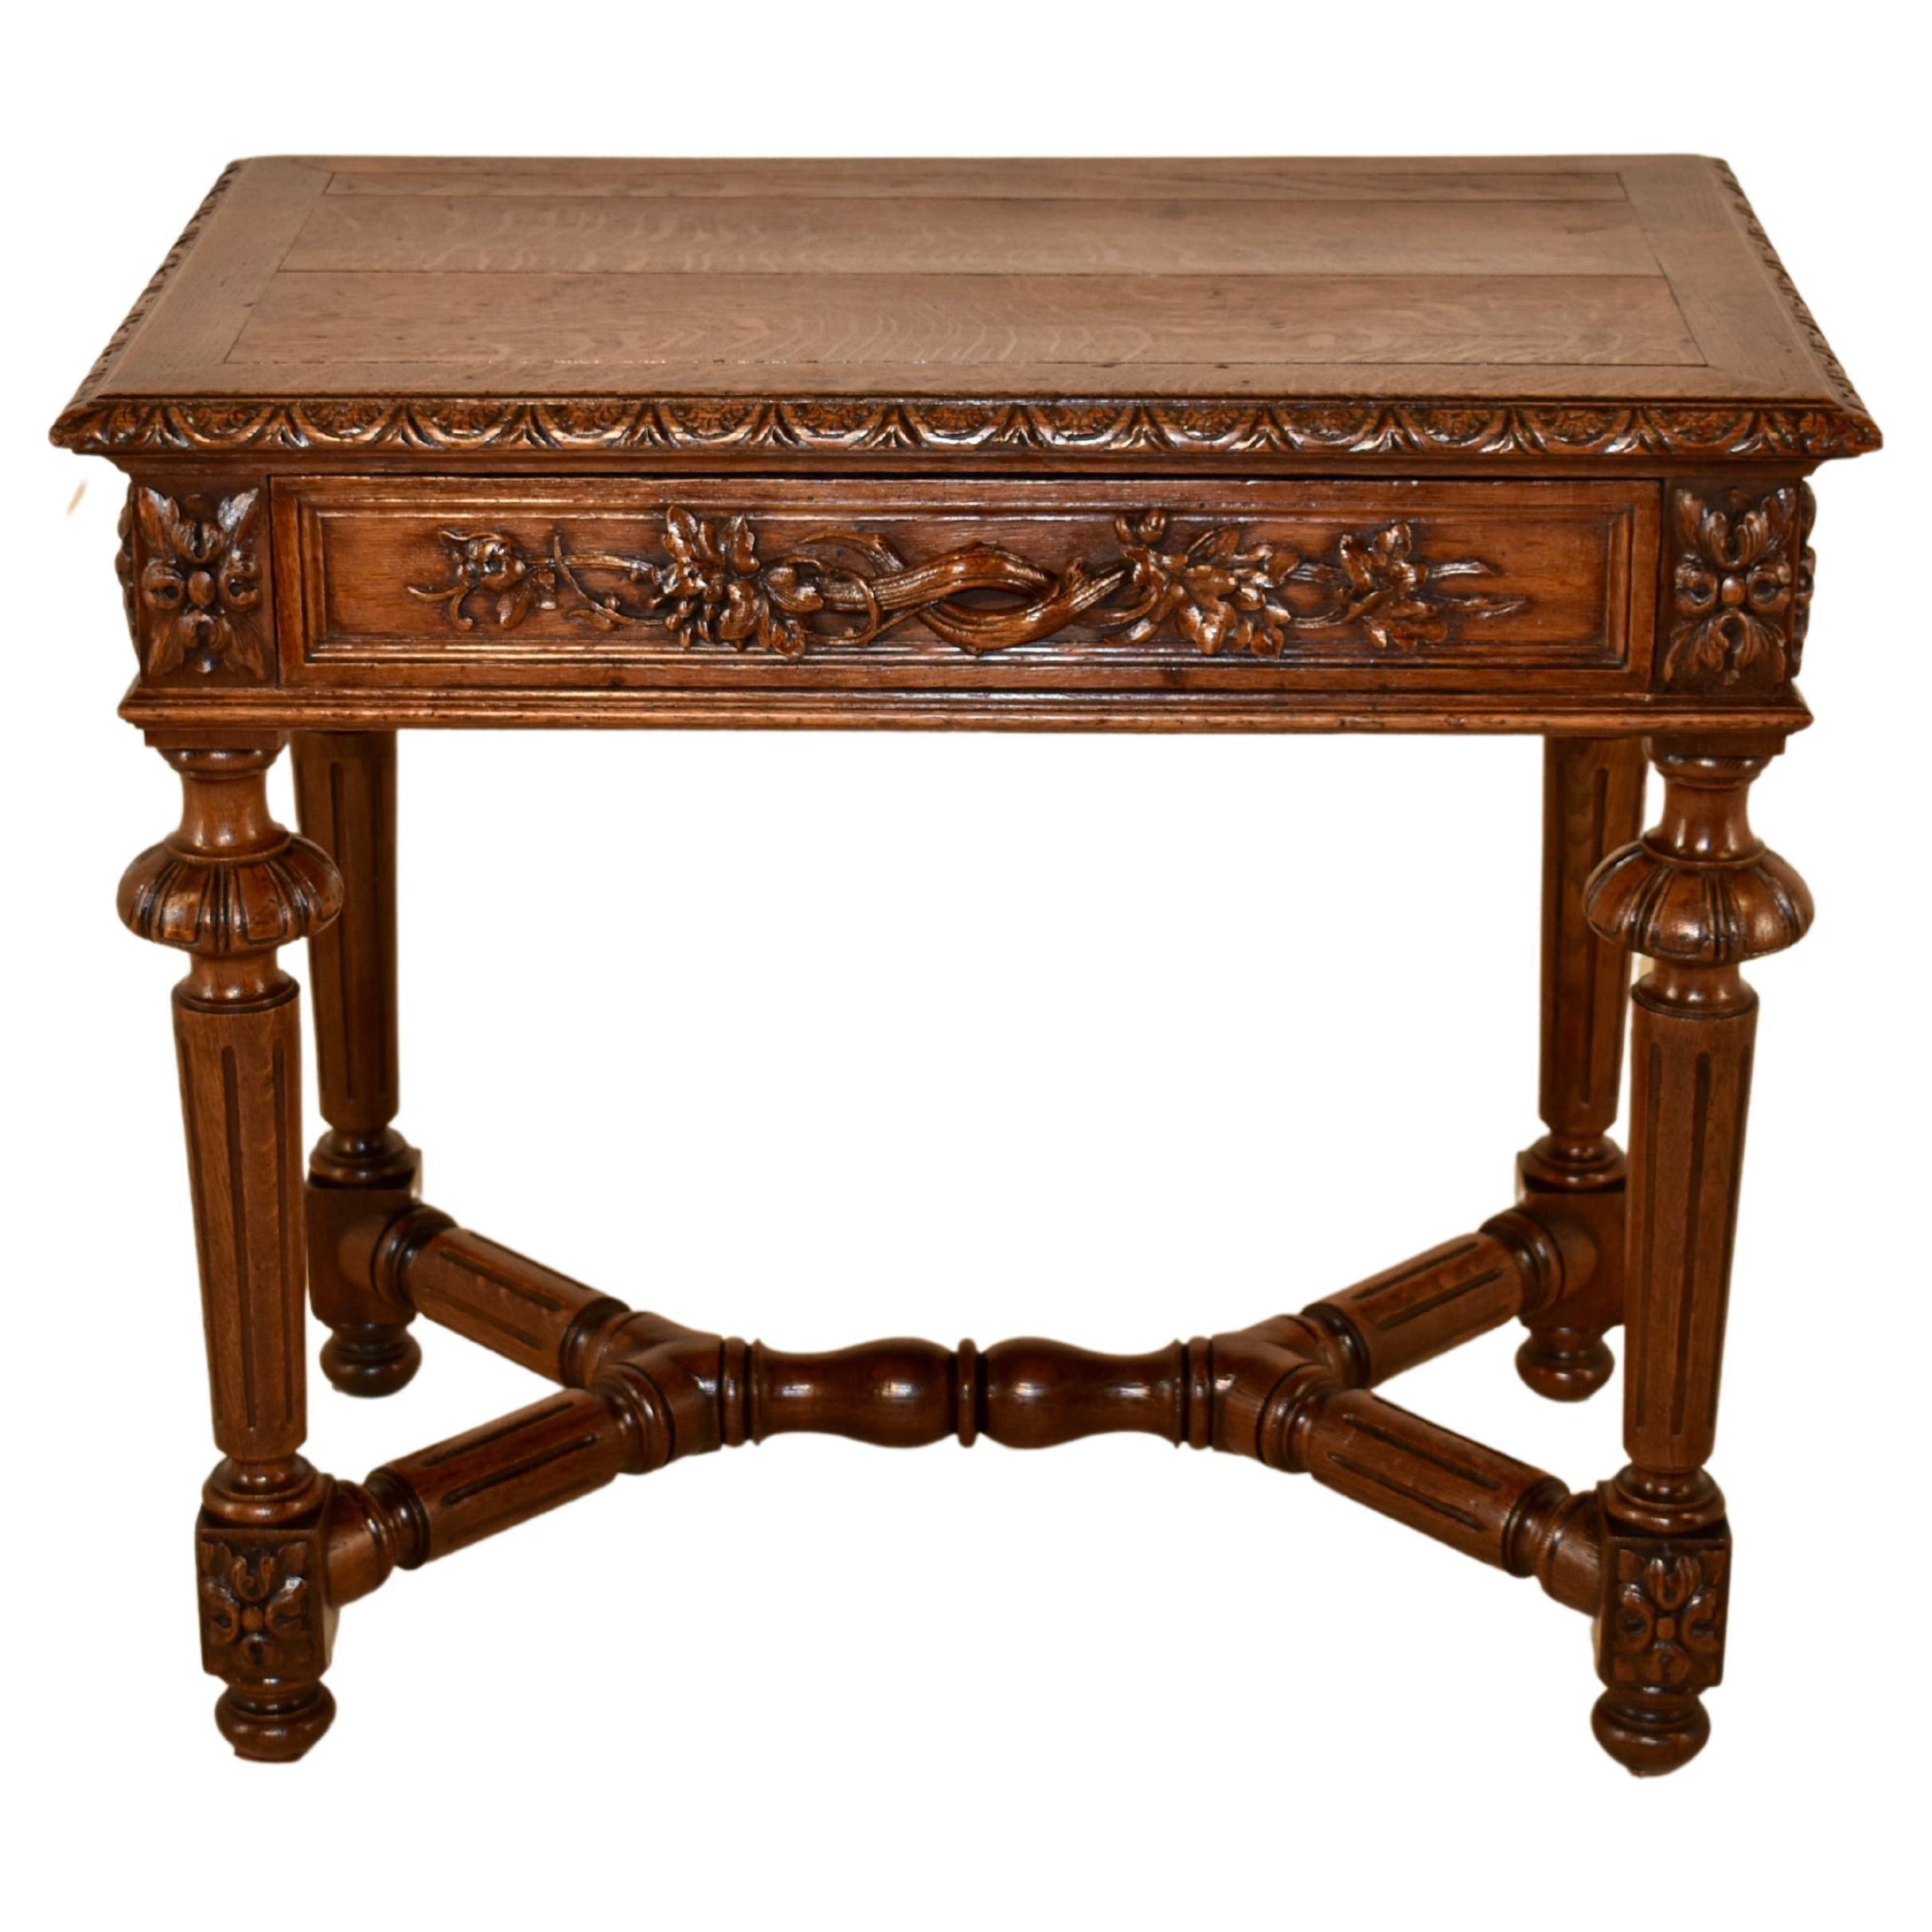 19th century oak side table from France with a banded edge around the top and a beveled edge with hand carved decoration. The top follows down to paneled sides, with three having gorgeous hand carved designs. The back is finished and simple, with no